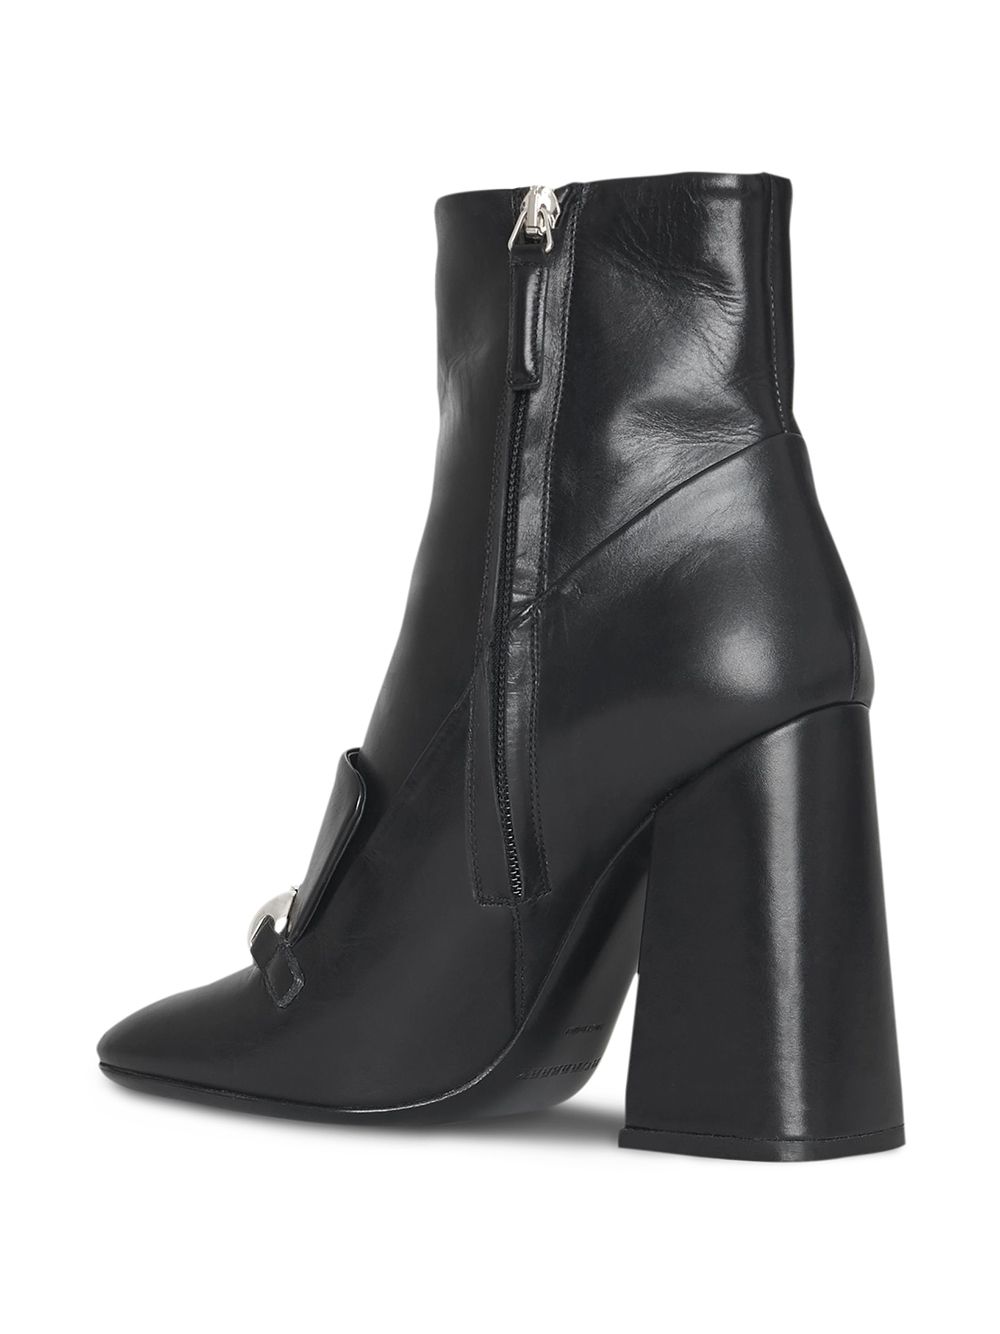 Burberry Studded Bar Detail Leather Ankle Boots - Farfetch